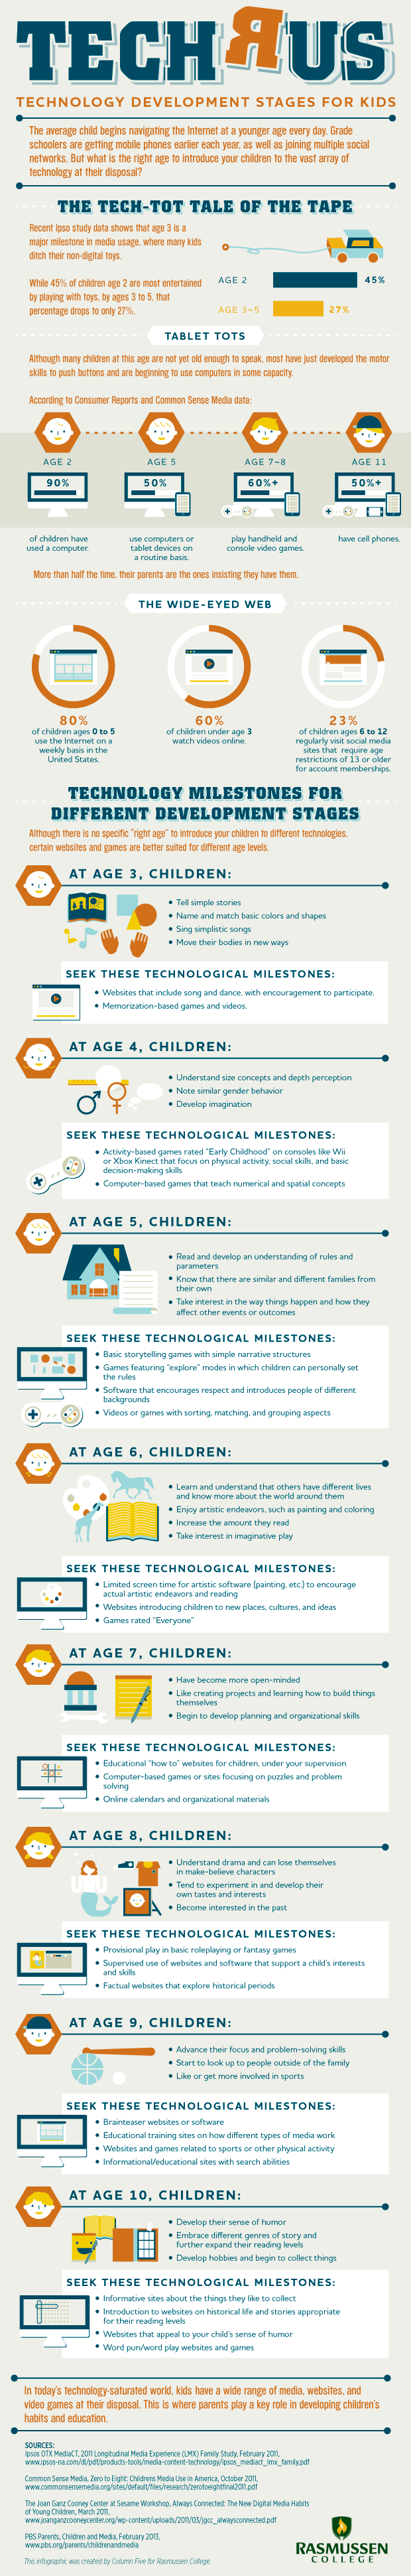 TECH R US - Technology Development Stages for Kids